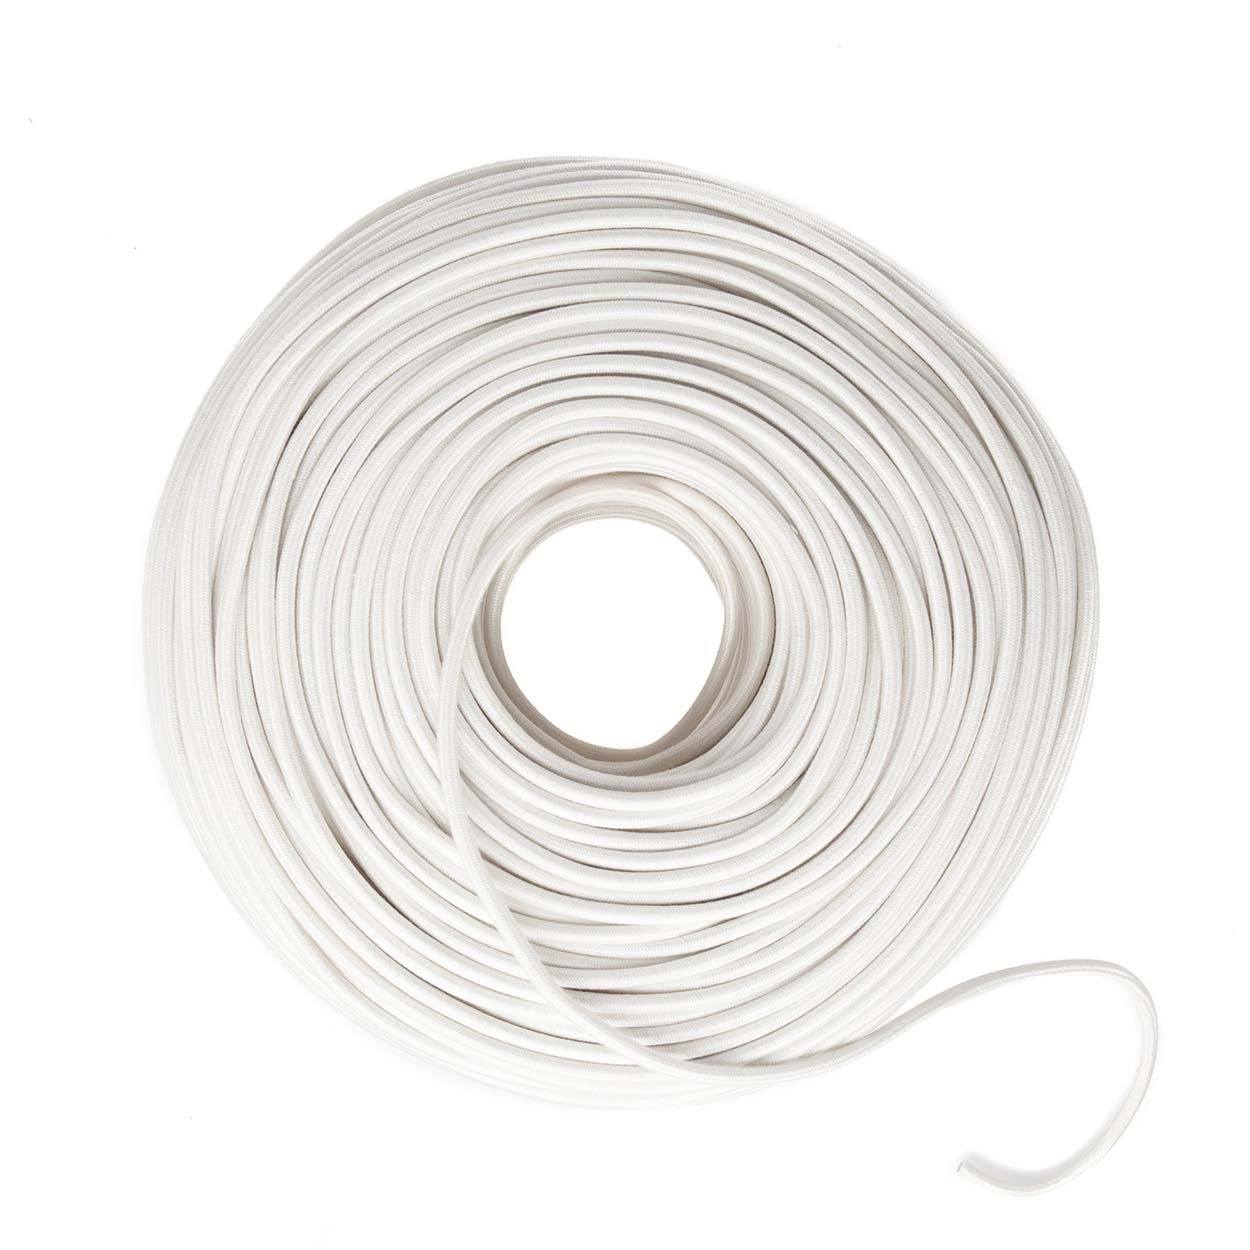 Cloth Covered Wire 18g, White Cotton